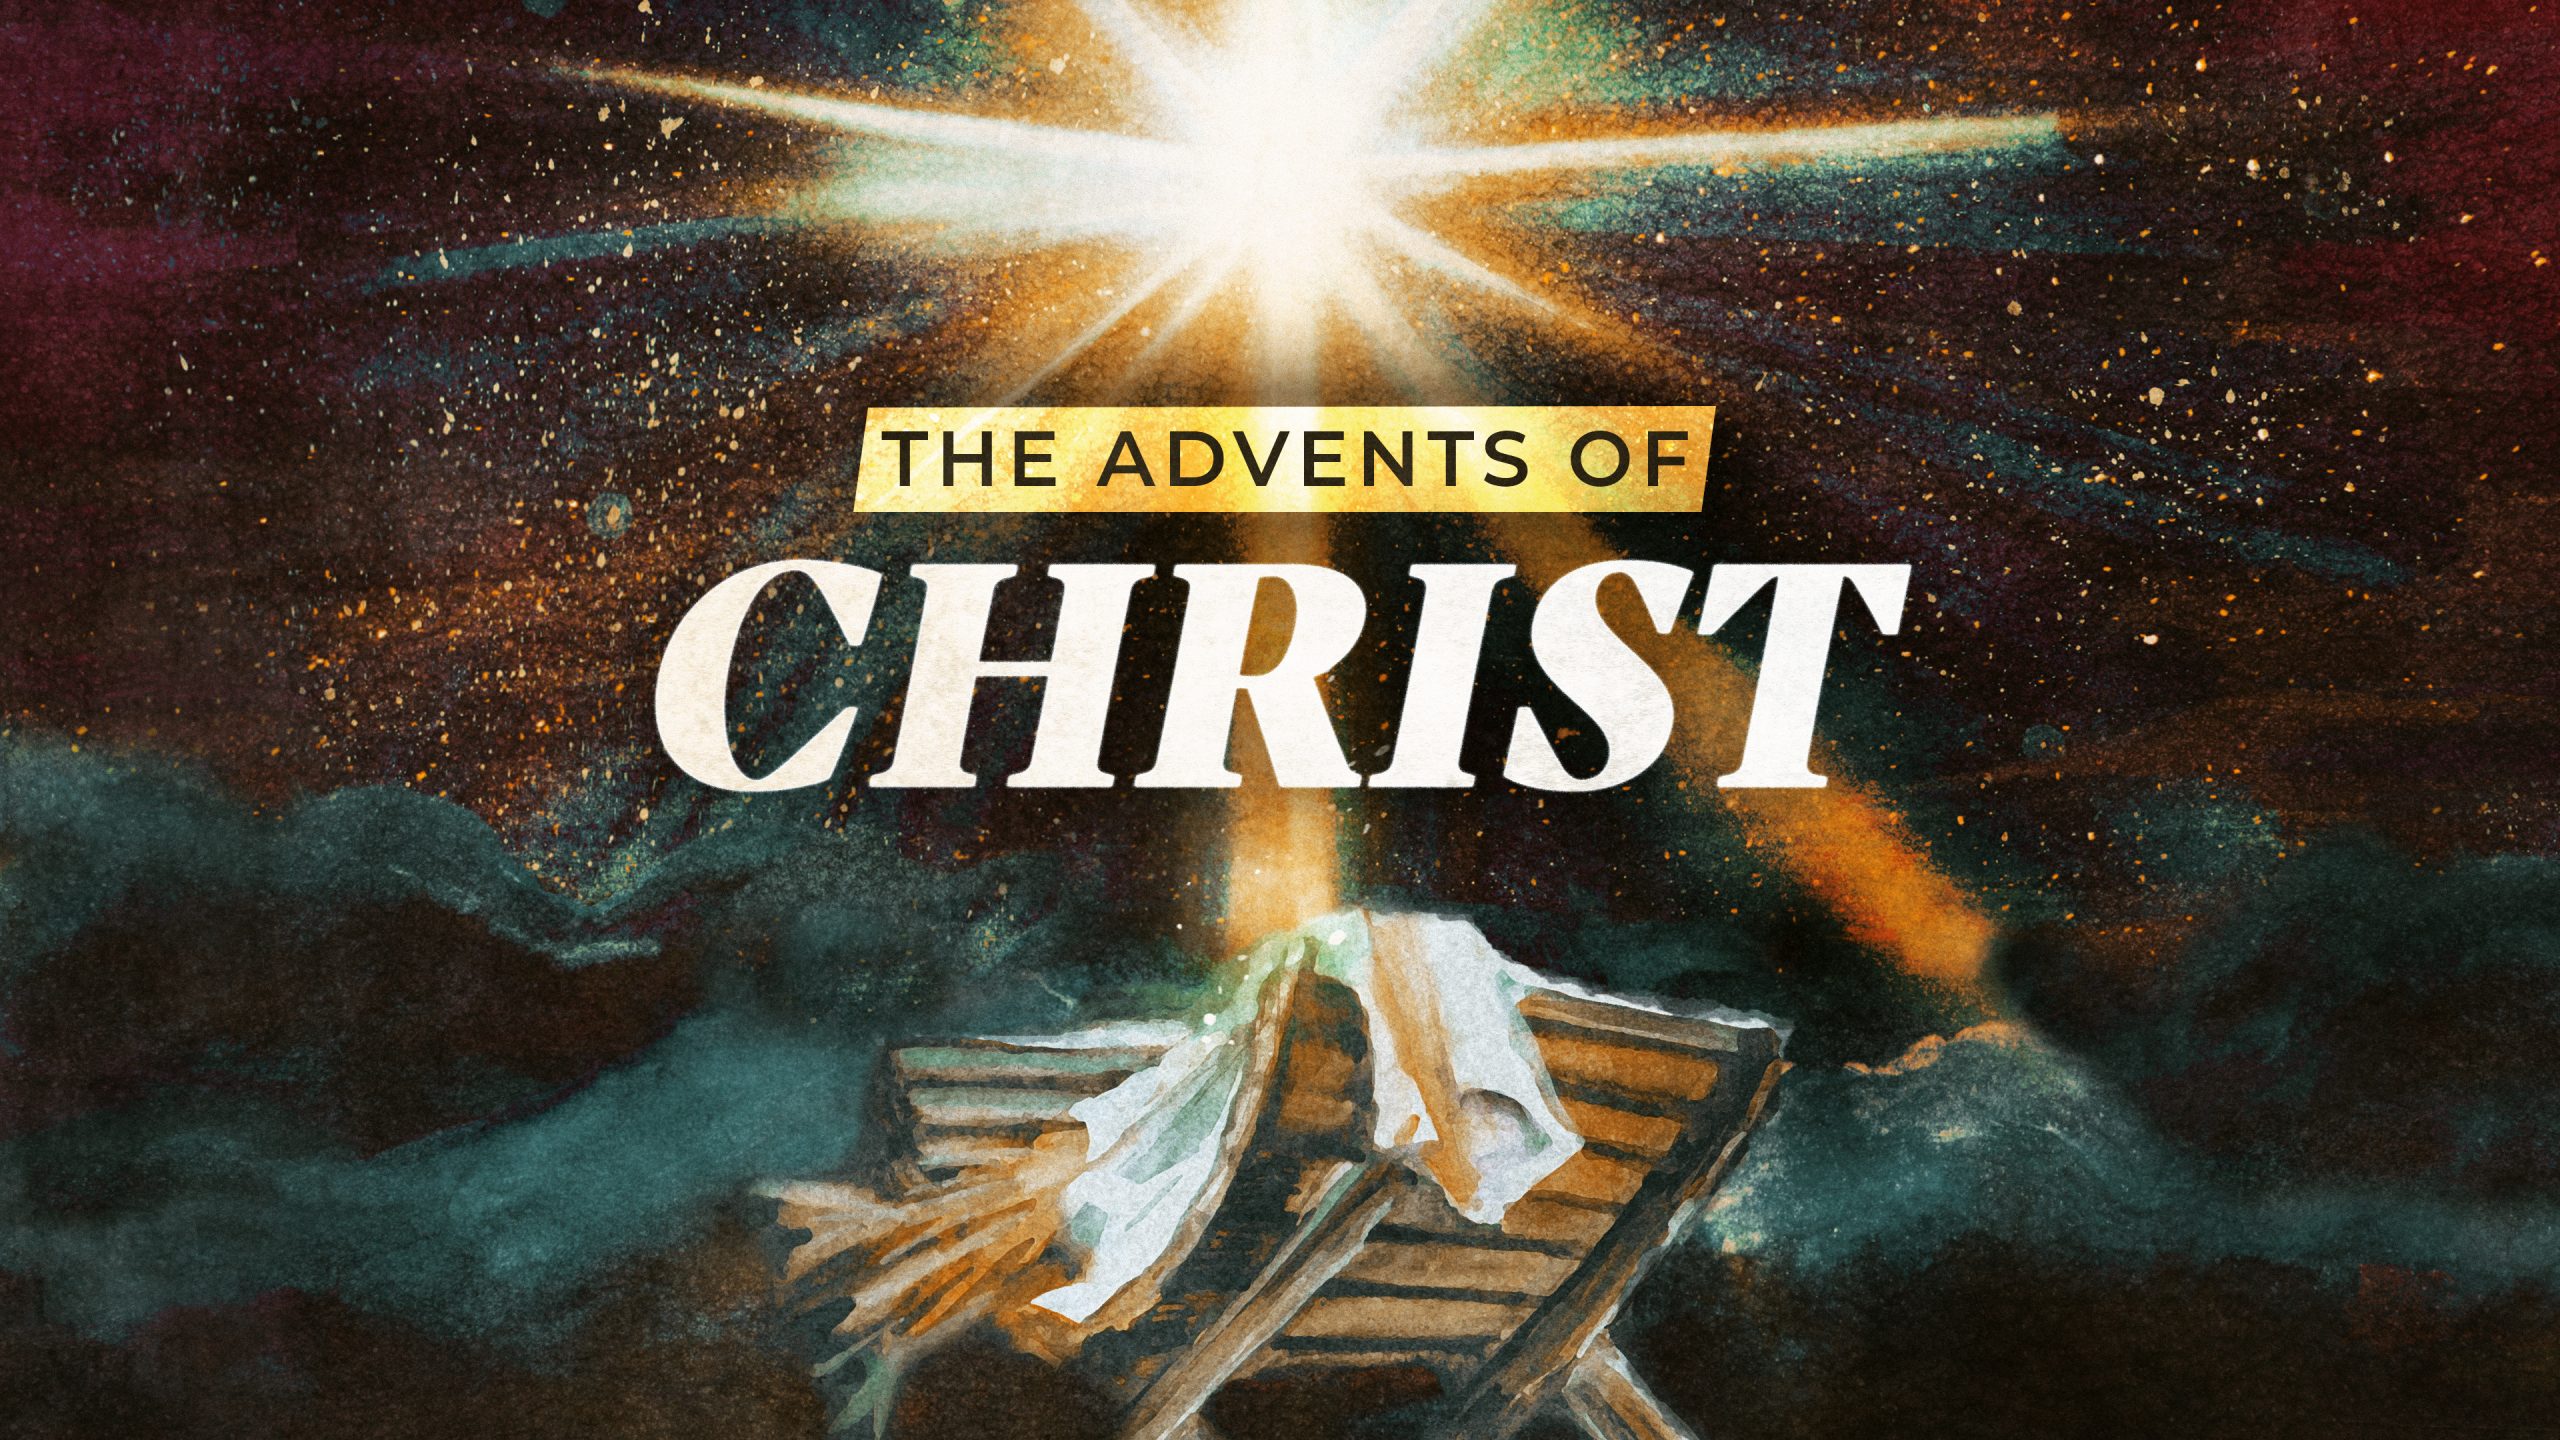 The Advents of Christ